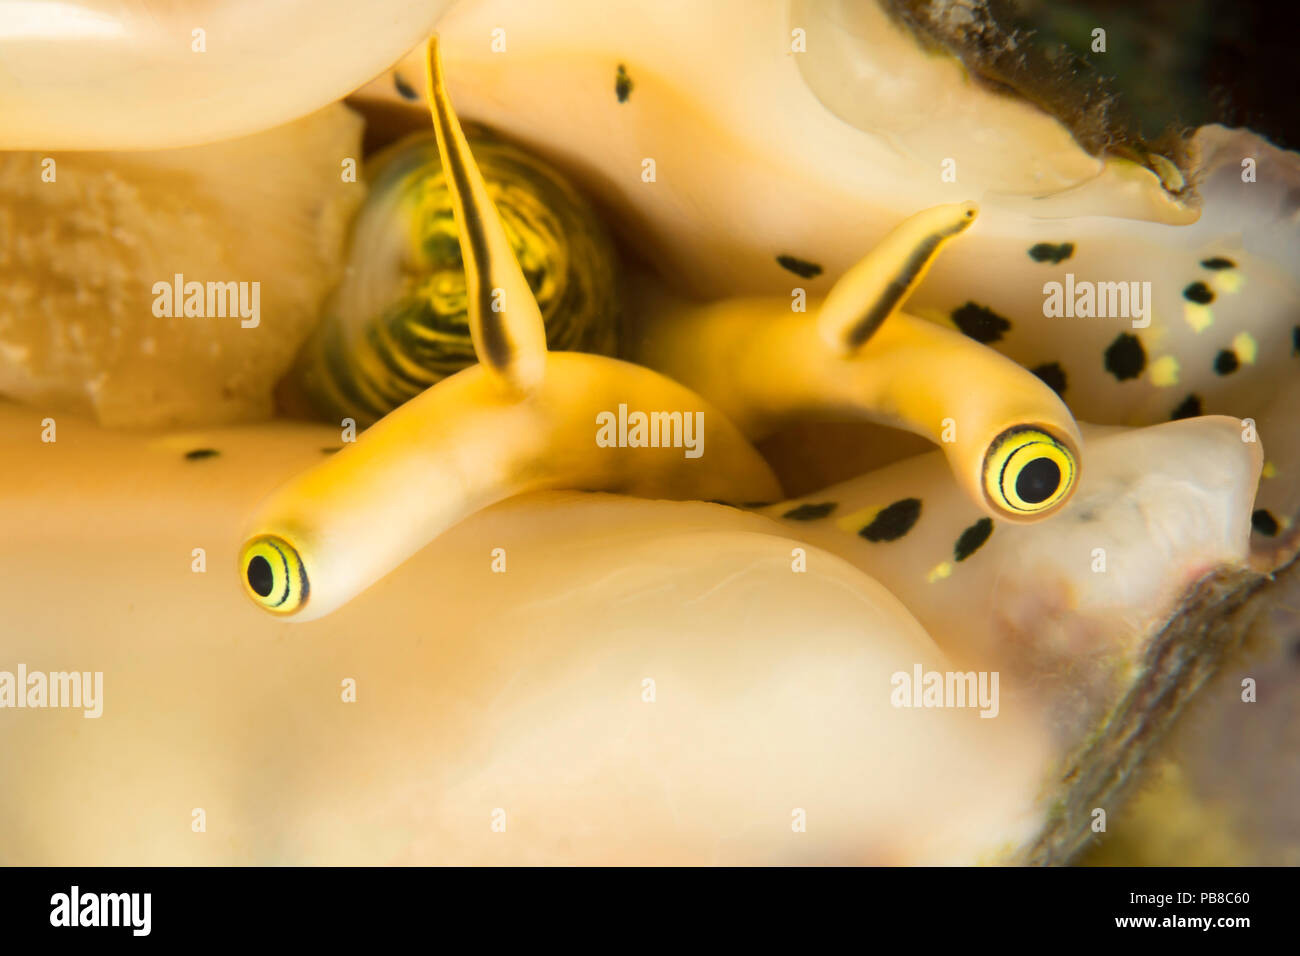 A close look at the eye stocks of an elegant conch, Lentigo pipus, Philippines. Stock Photo